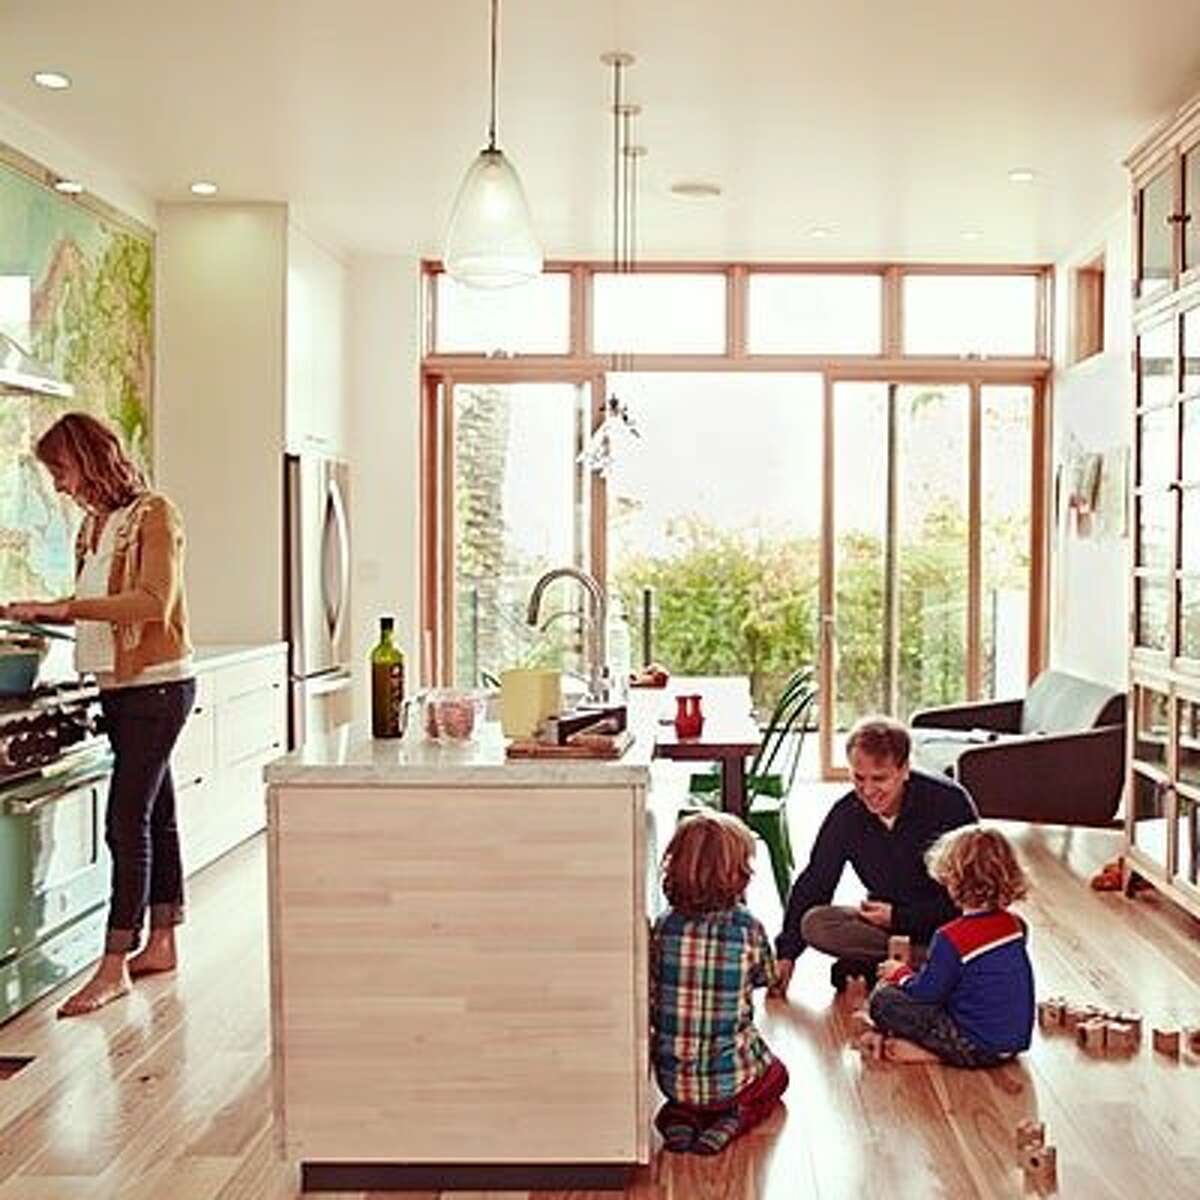 Modern meets old-school: Modern lines and electricity are present in the kitchen, but there are no digital interfaces on those shiny appliances. On the floor, the kids play with toys like wood blocks, not video games. Read more: The unplugged home